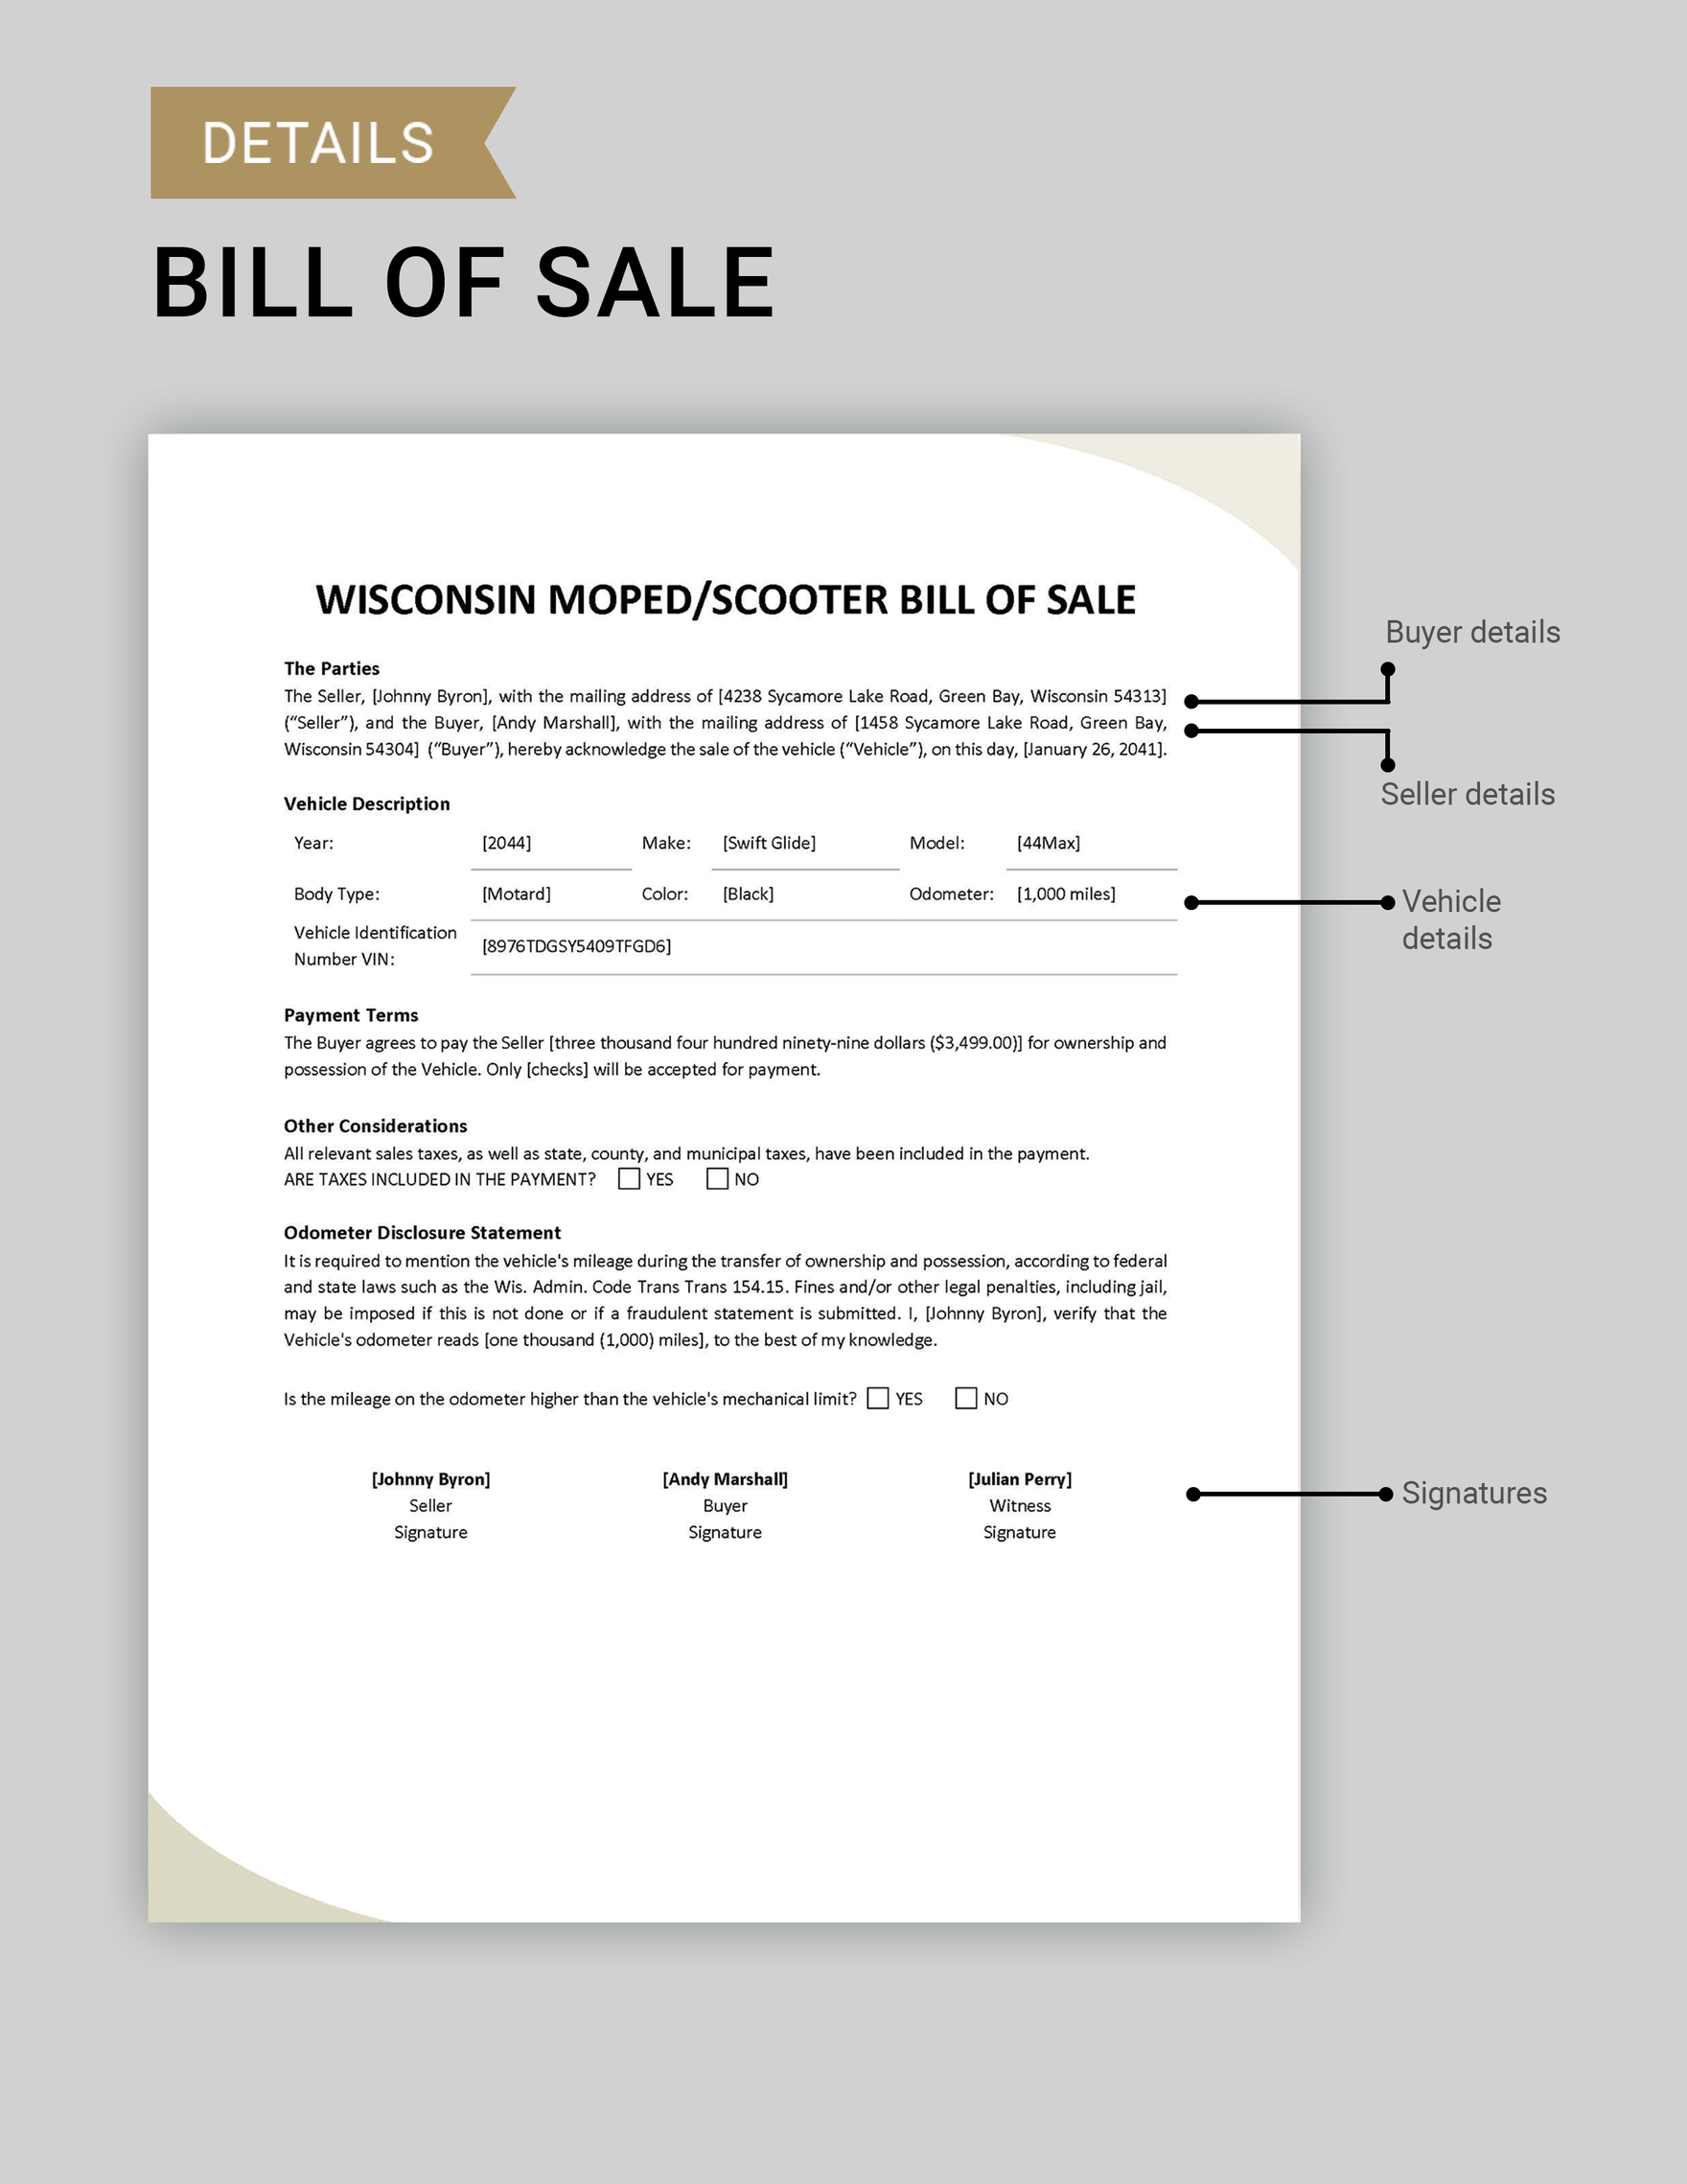 Wisconsin Moped / Scooter Bill of Sale Template